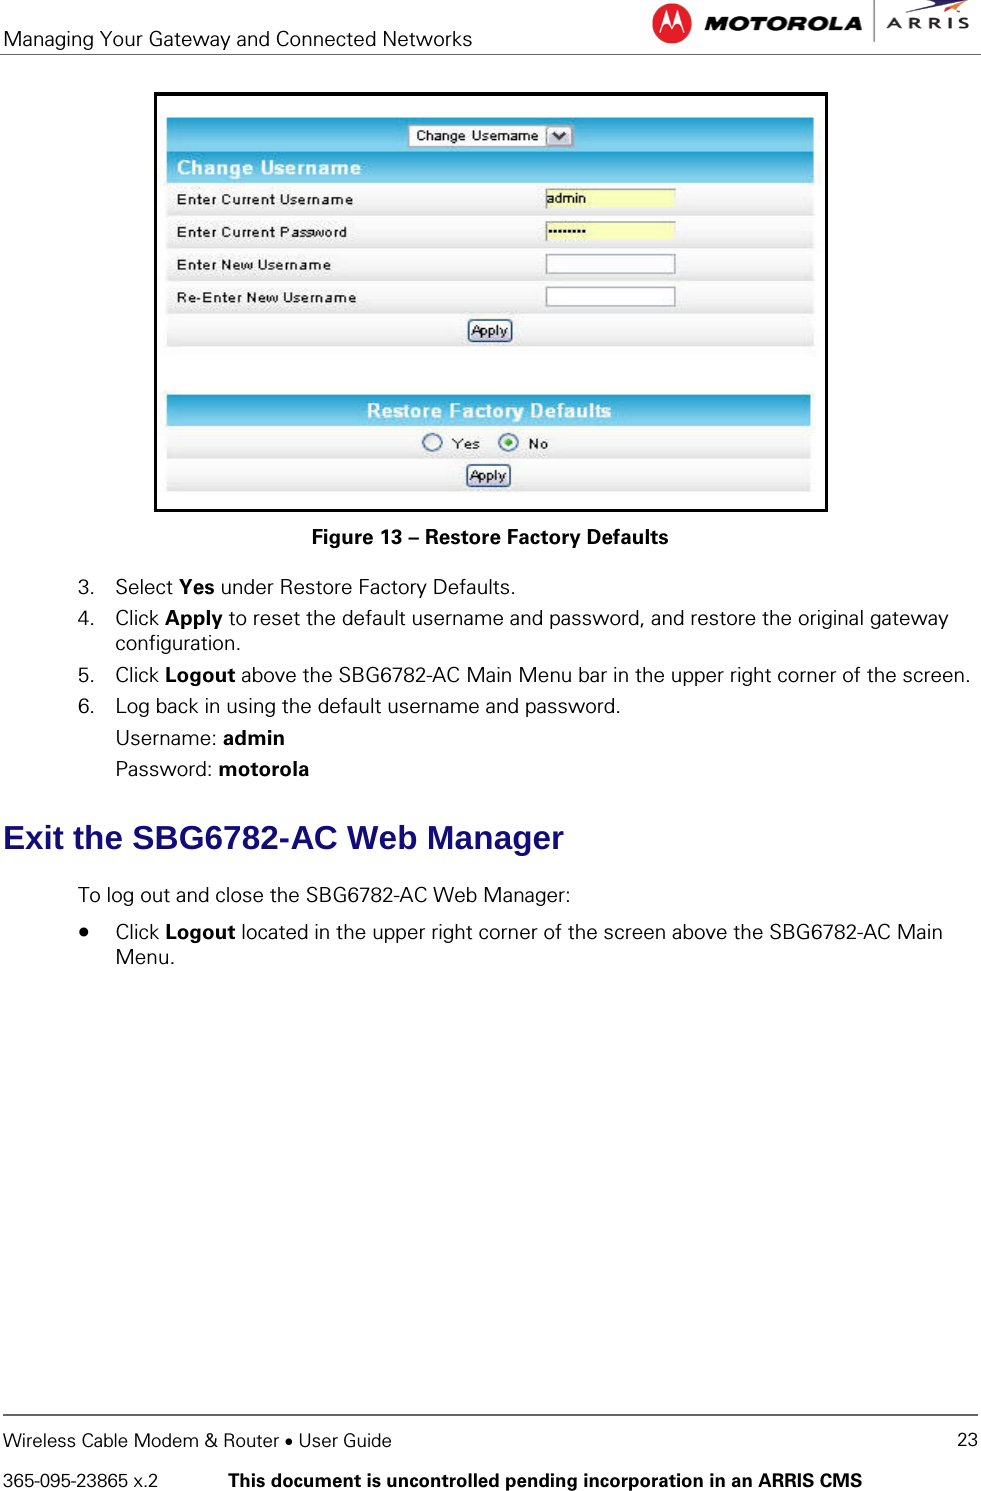 Managing Your Gateway and Connected Networks   Wireless Cable Modem &amp; Router • User Guide 23 365-095-23865 x.2   This document is uncontrolled pending incorporation in an ARRIS CMS   Figure 13 – Restore Factory Defaults 3. Select Yes under Restore Factory Defaults. 4. Click Apply to reset the default username and password, and restore the original gateway configuration. 5. Click Logout above the SBG6782-AC Main Menu bar in the upper right corner of the screen. 6. Log back in using the default username and password. Username: admin Password: motorola Exit the SBG6782-AC Web Manager To log out and close the SBG6782-AC Web Manager: • Click Logout located in the upper right corner of the screen above the SBG6782-AC Main Menu.   